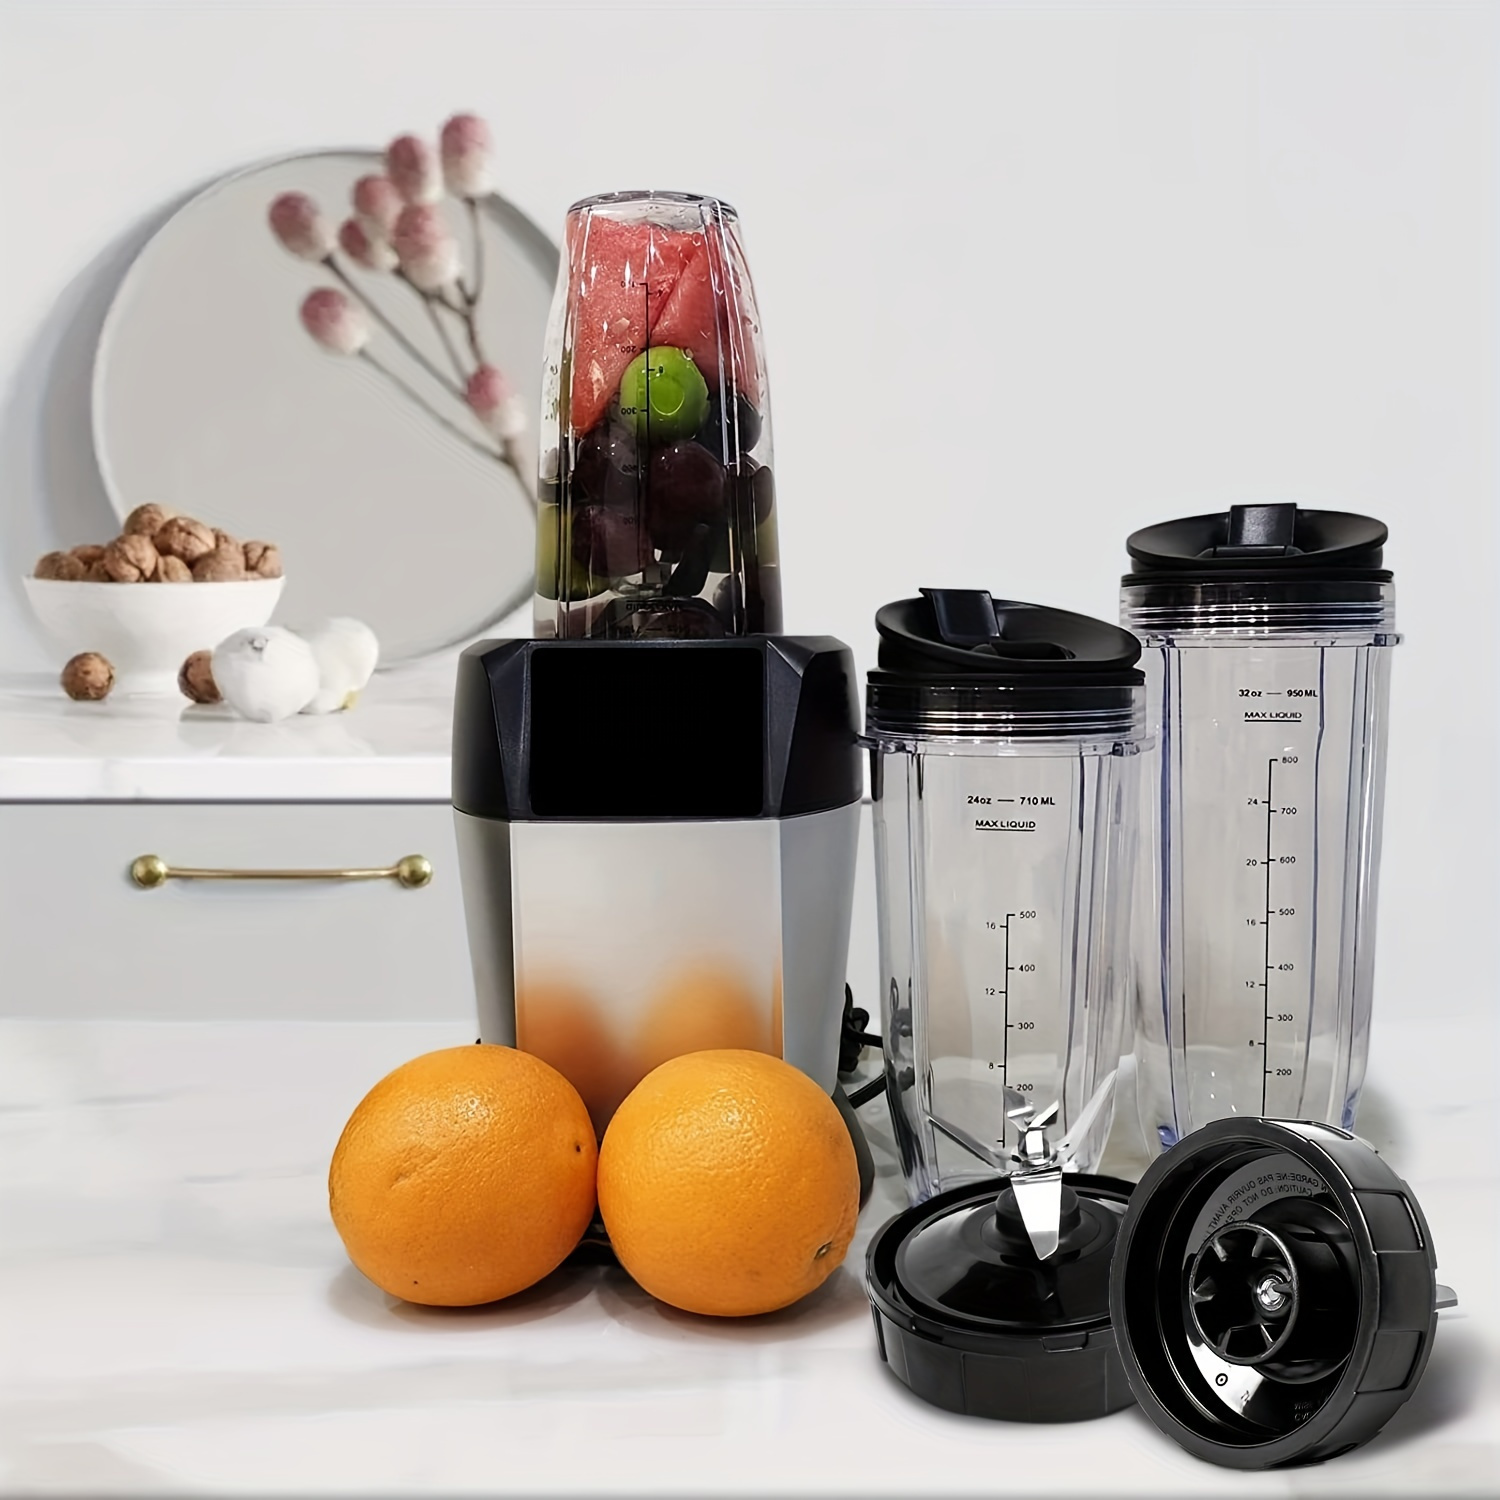 BioloMix 1300W Smoothie Blender With 50.72oz Glass Jar, Personal Blenders  Combo For Frozen Fruit Drinks, Sauces